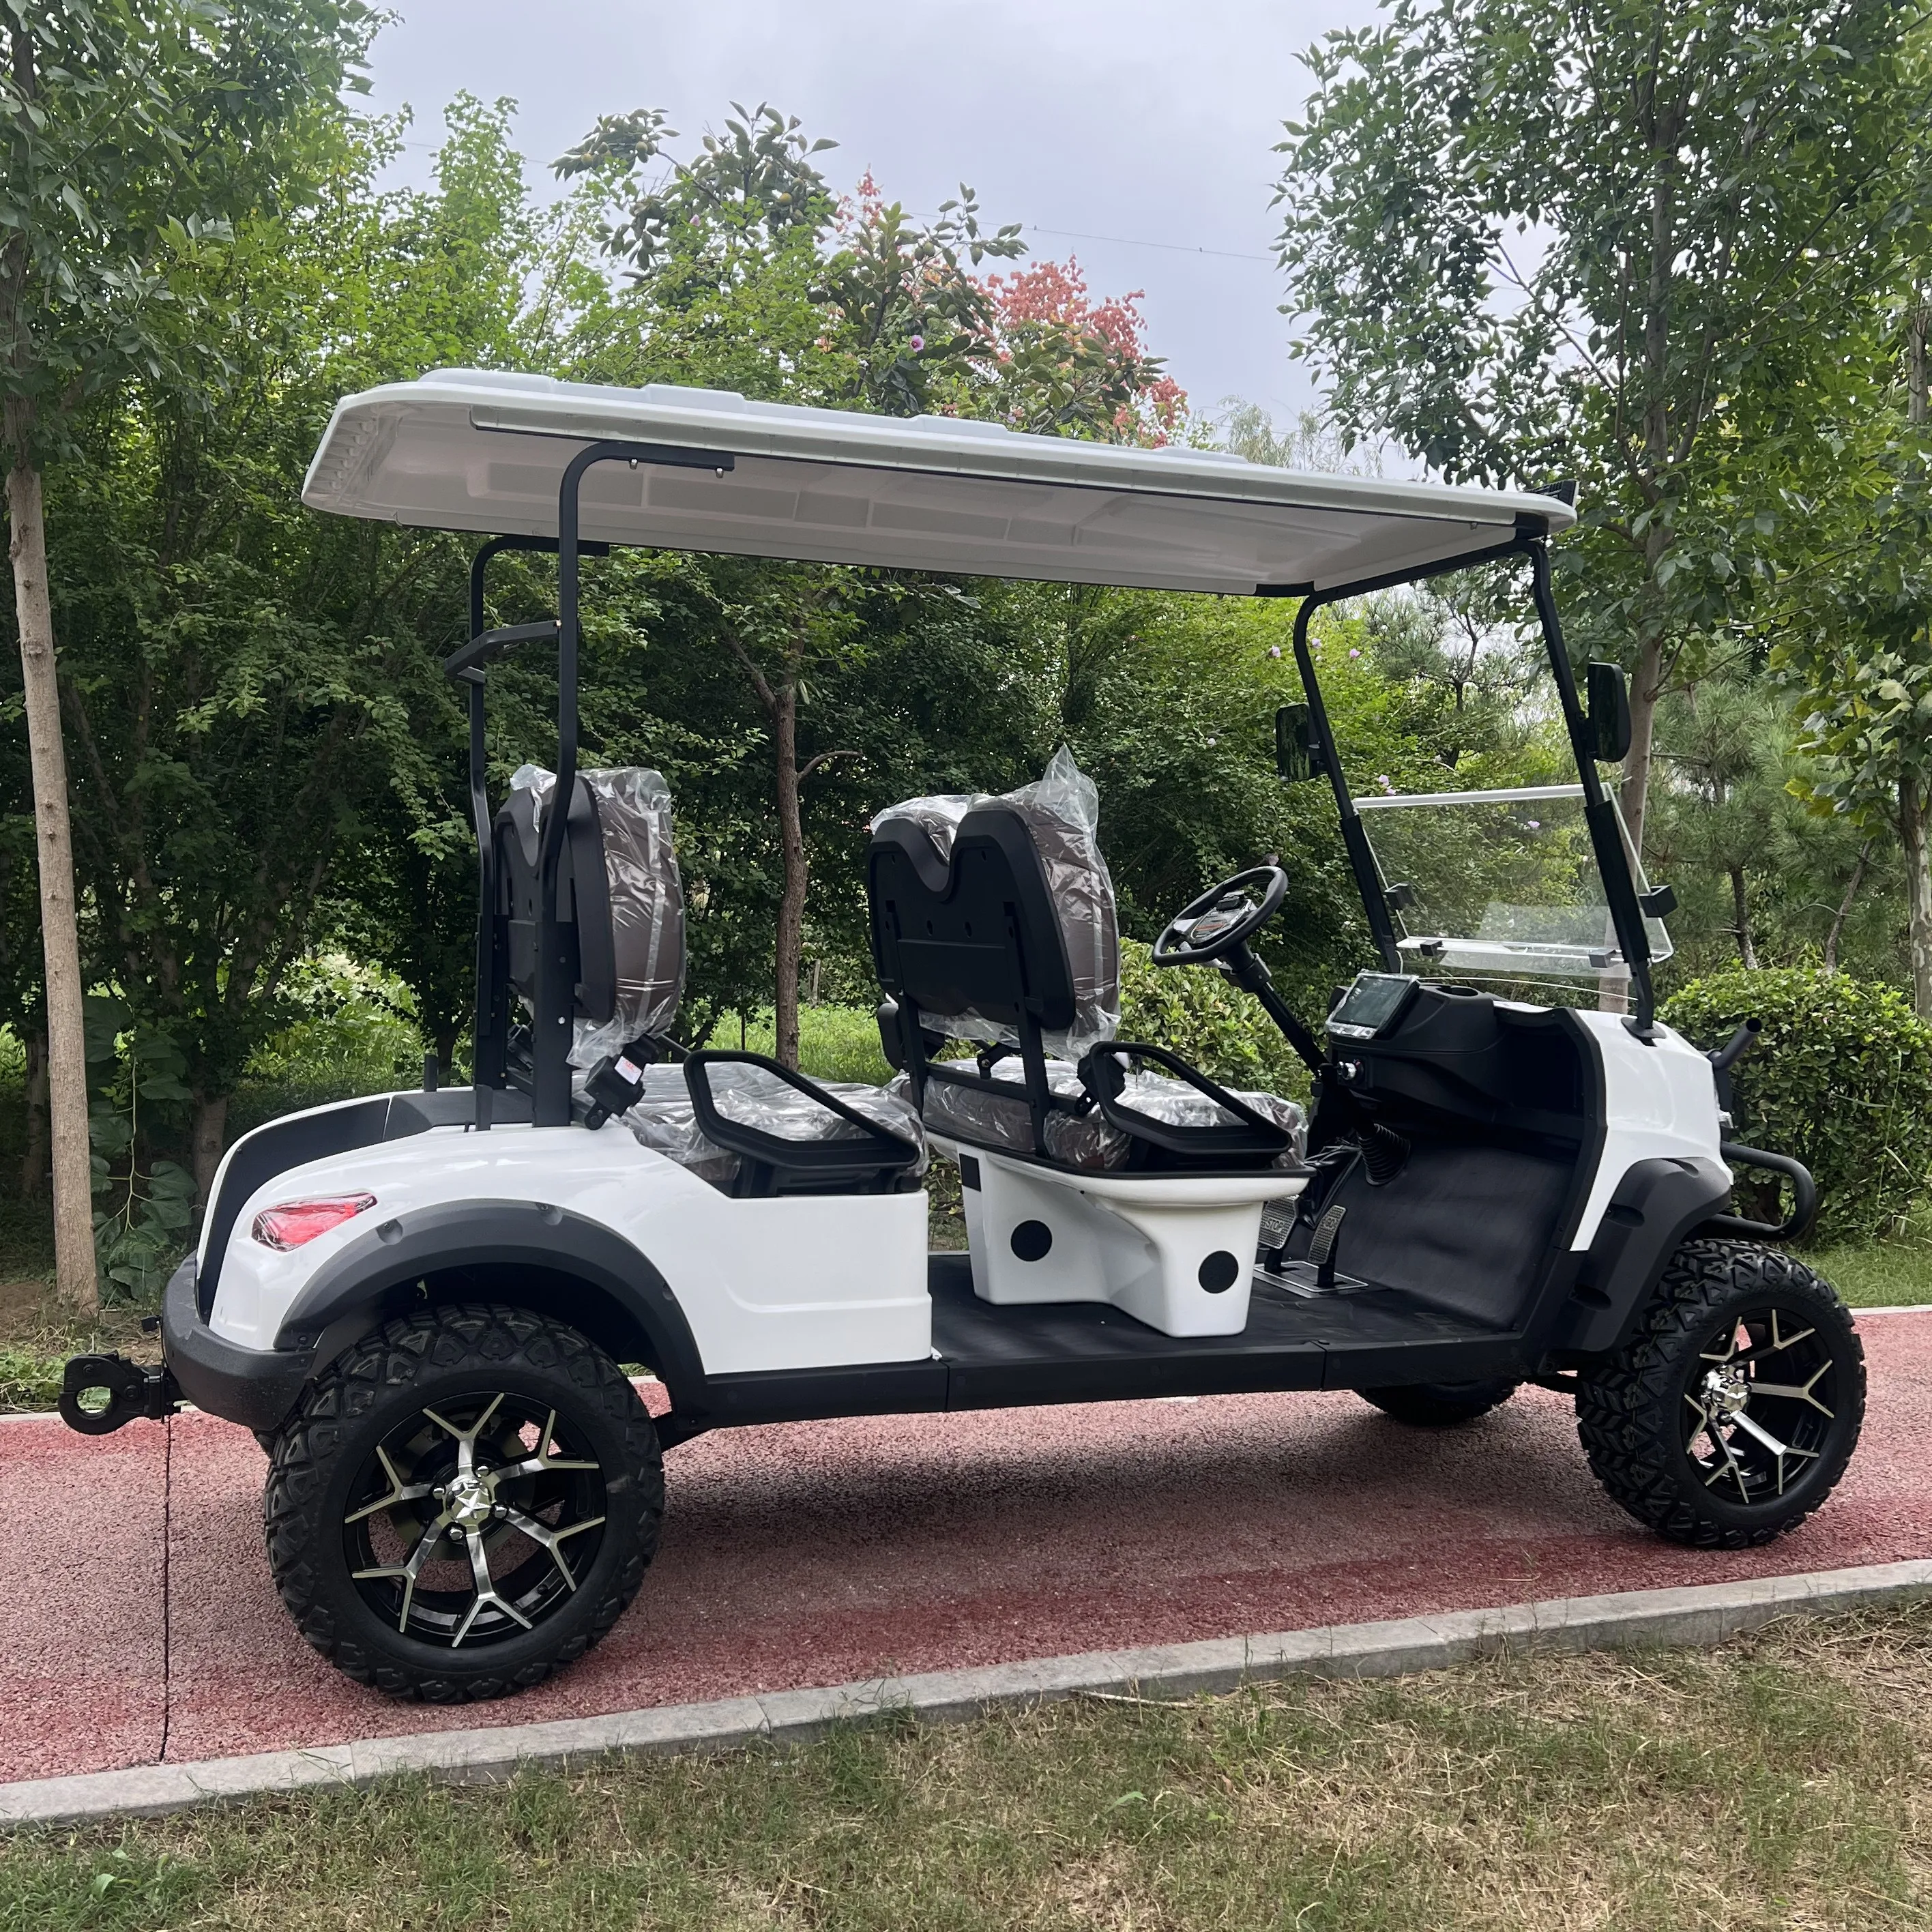 

China Factory New Model 4 Seater Golf Buggy Cart Sightseeing Car Good Quality Electric Vehicle Off-Road Hunting Golf Carts